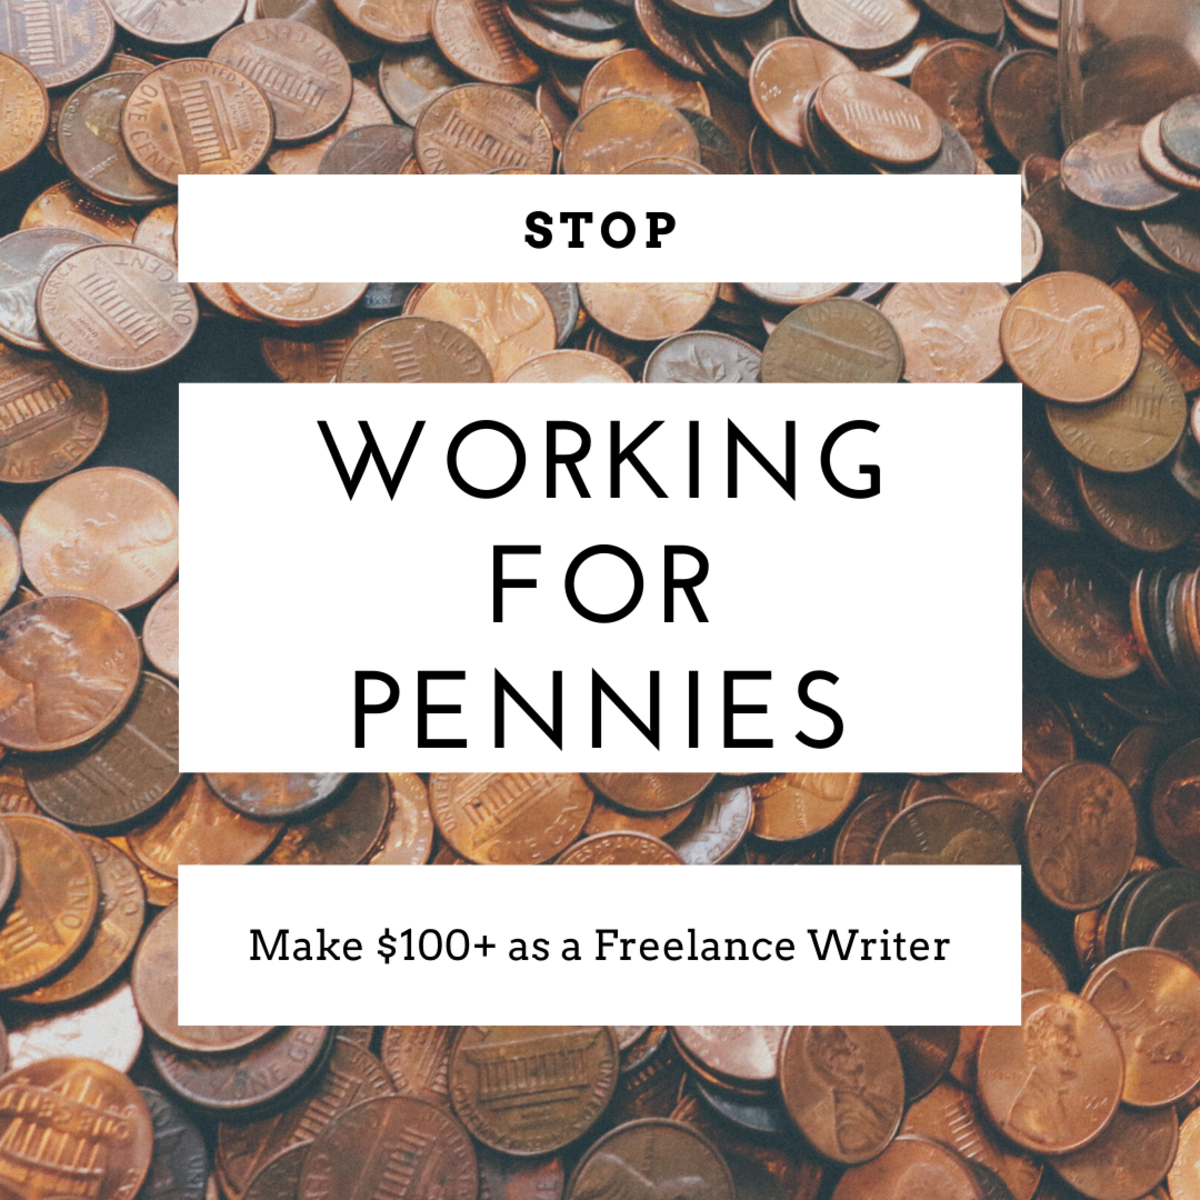 20 Best Freelance Writing Jobs That Pay $100+ per Article